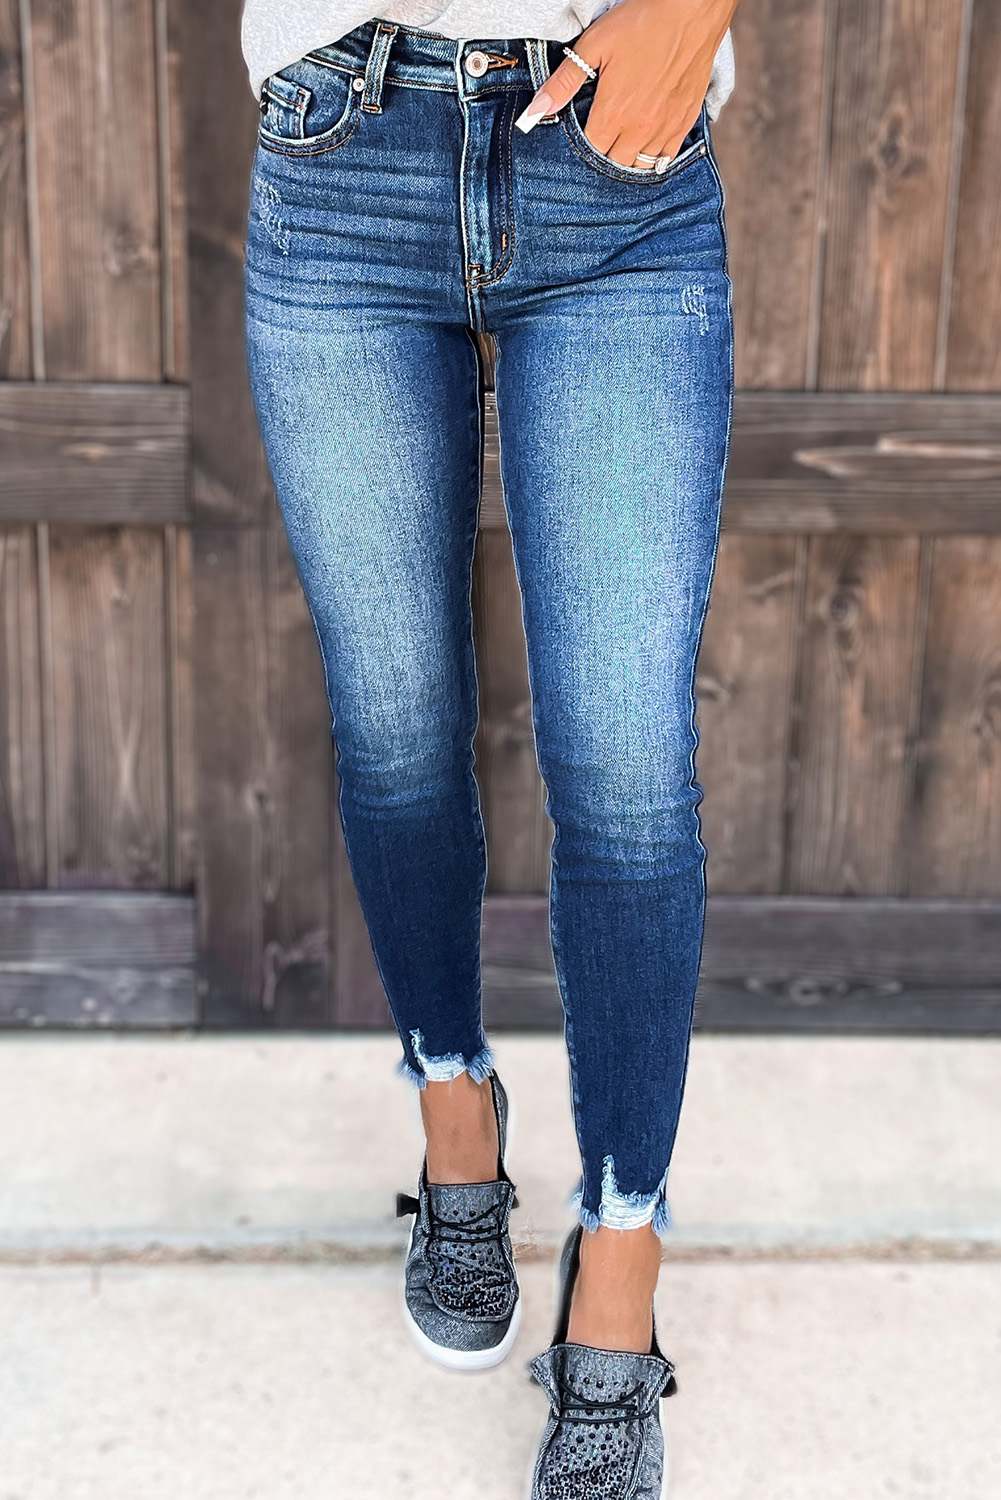 Useful tips to keep in mind when finding cheap distressed jeans for women